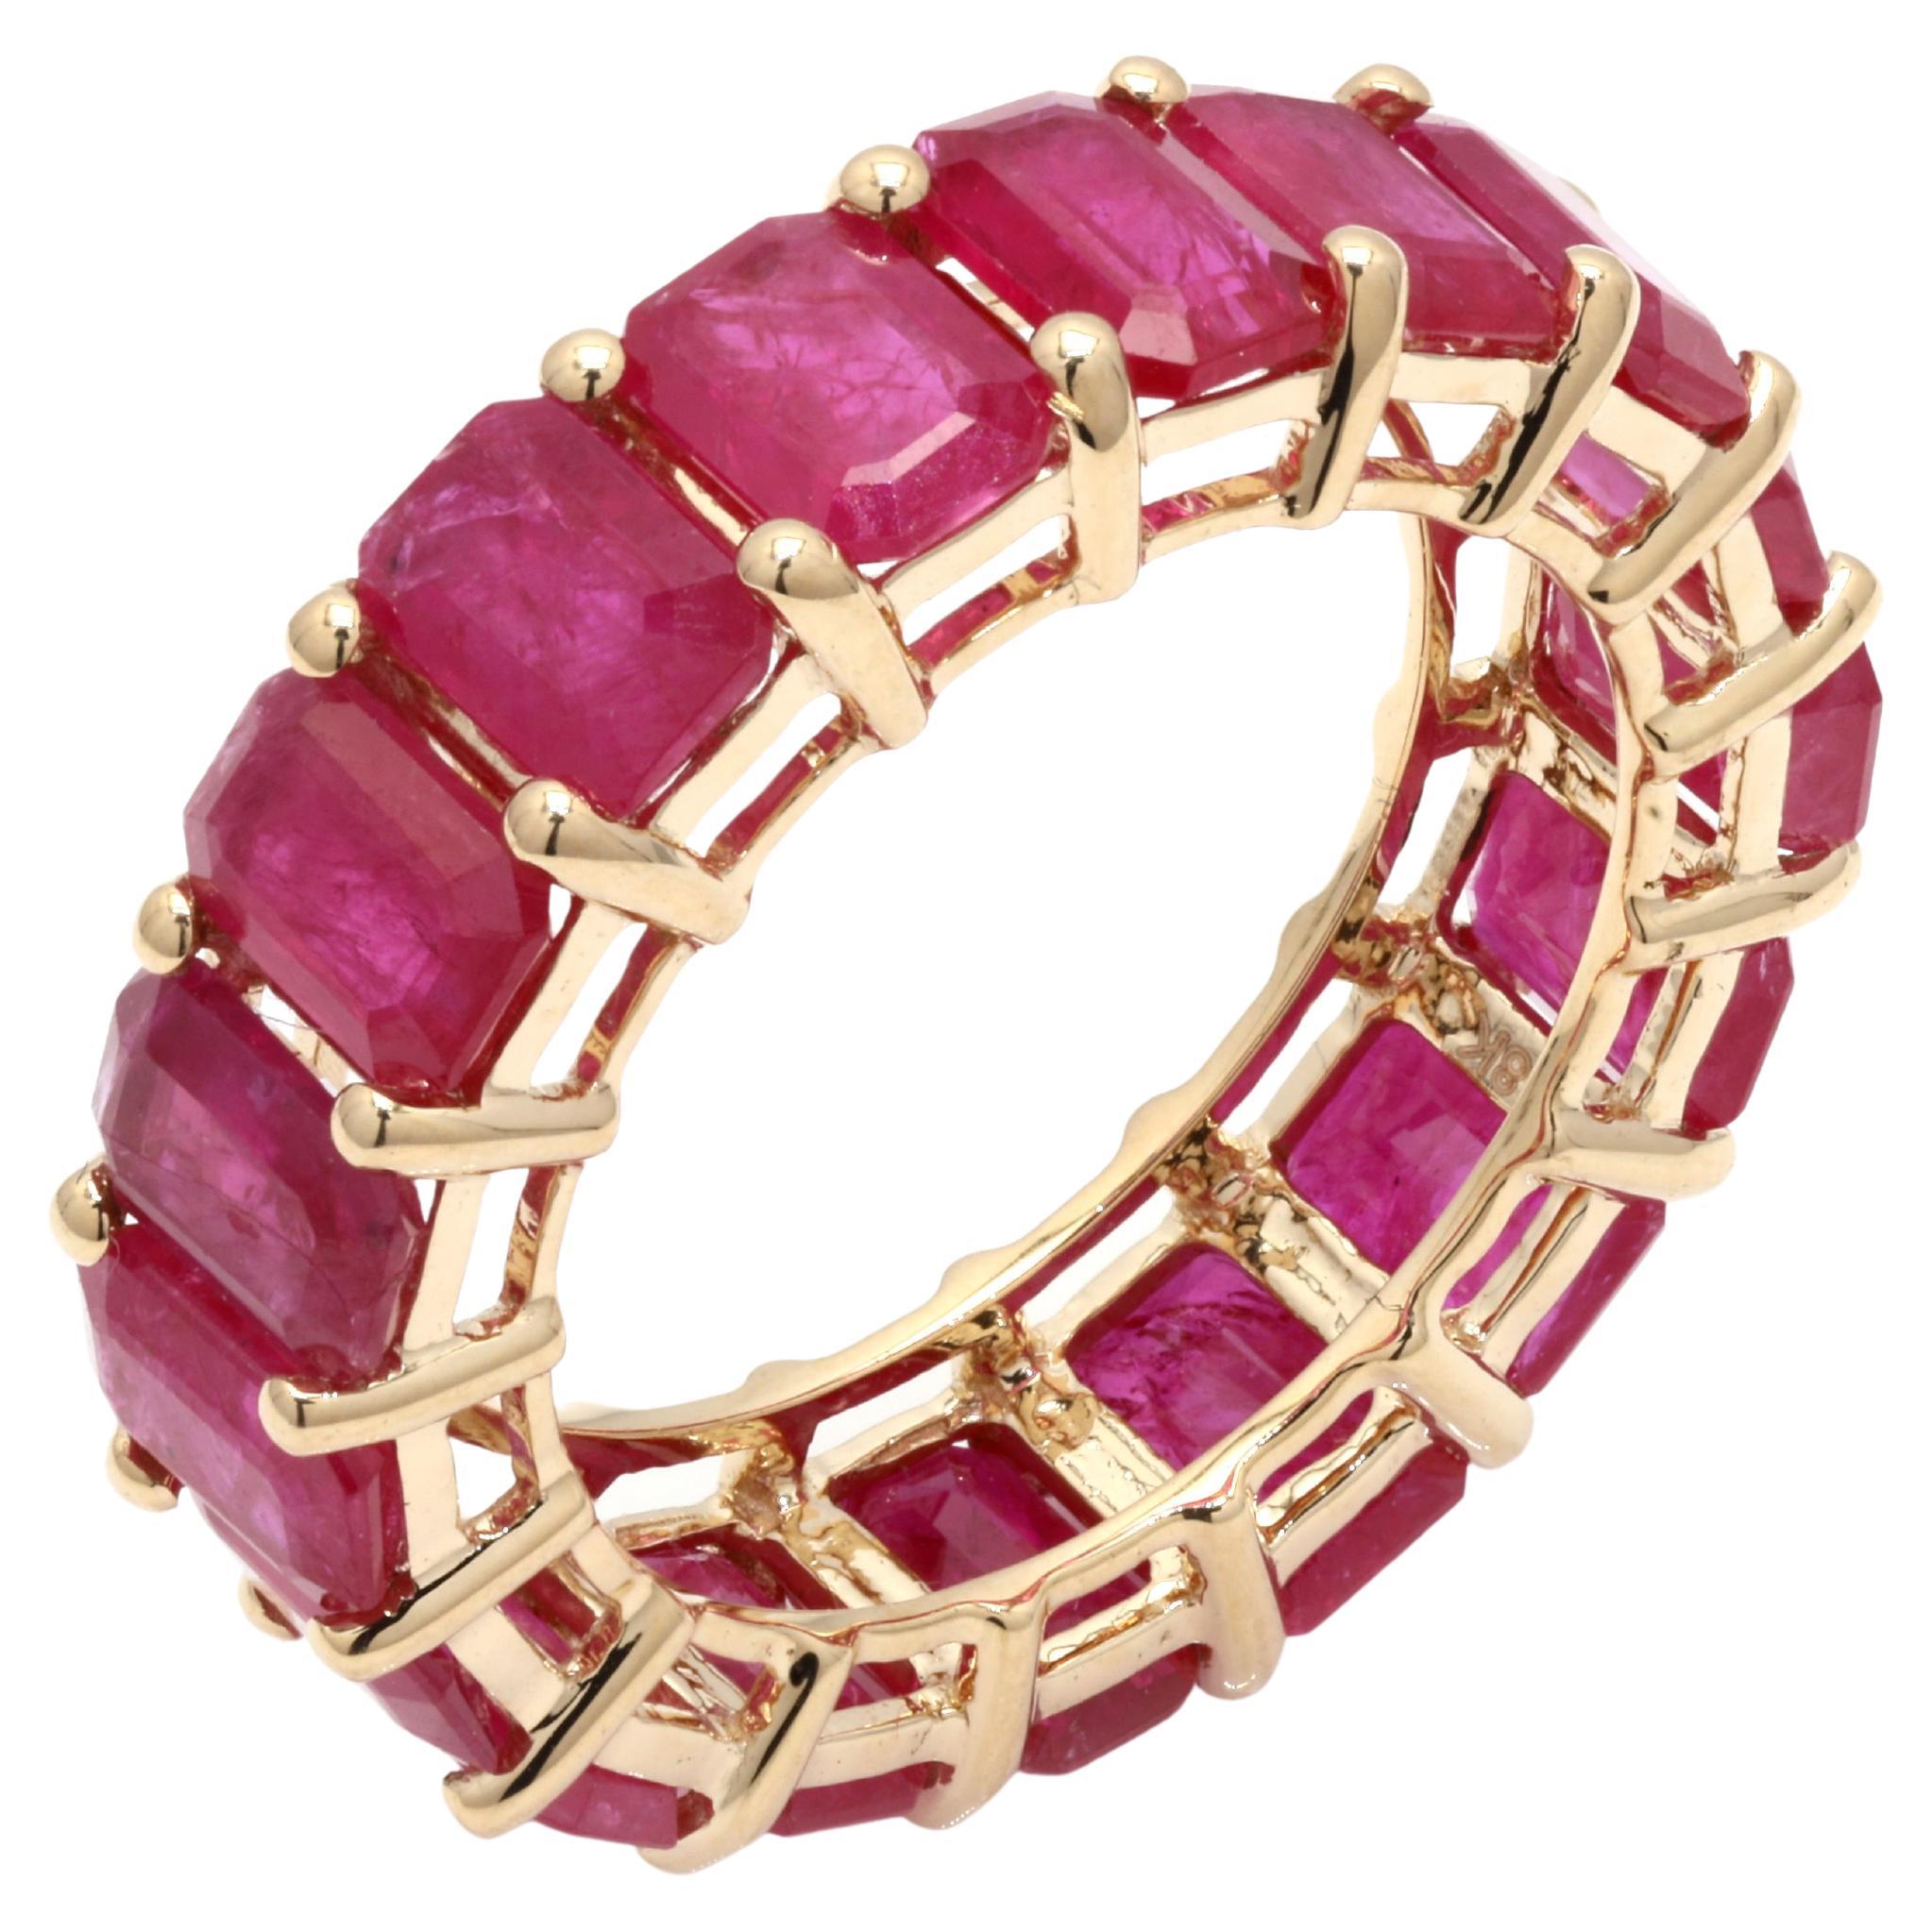 Magnificent 10.91 ct Ruby Eternity Band Ring 14k Yellow Gold Gift for Her